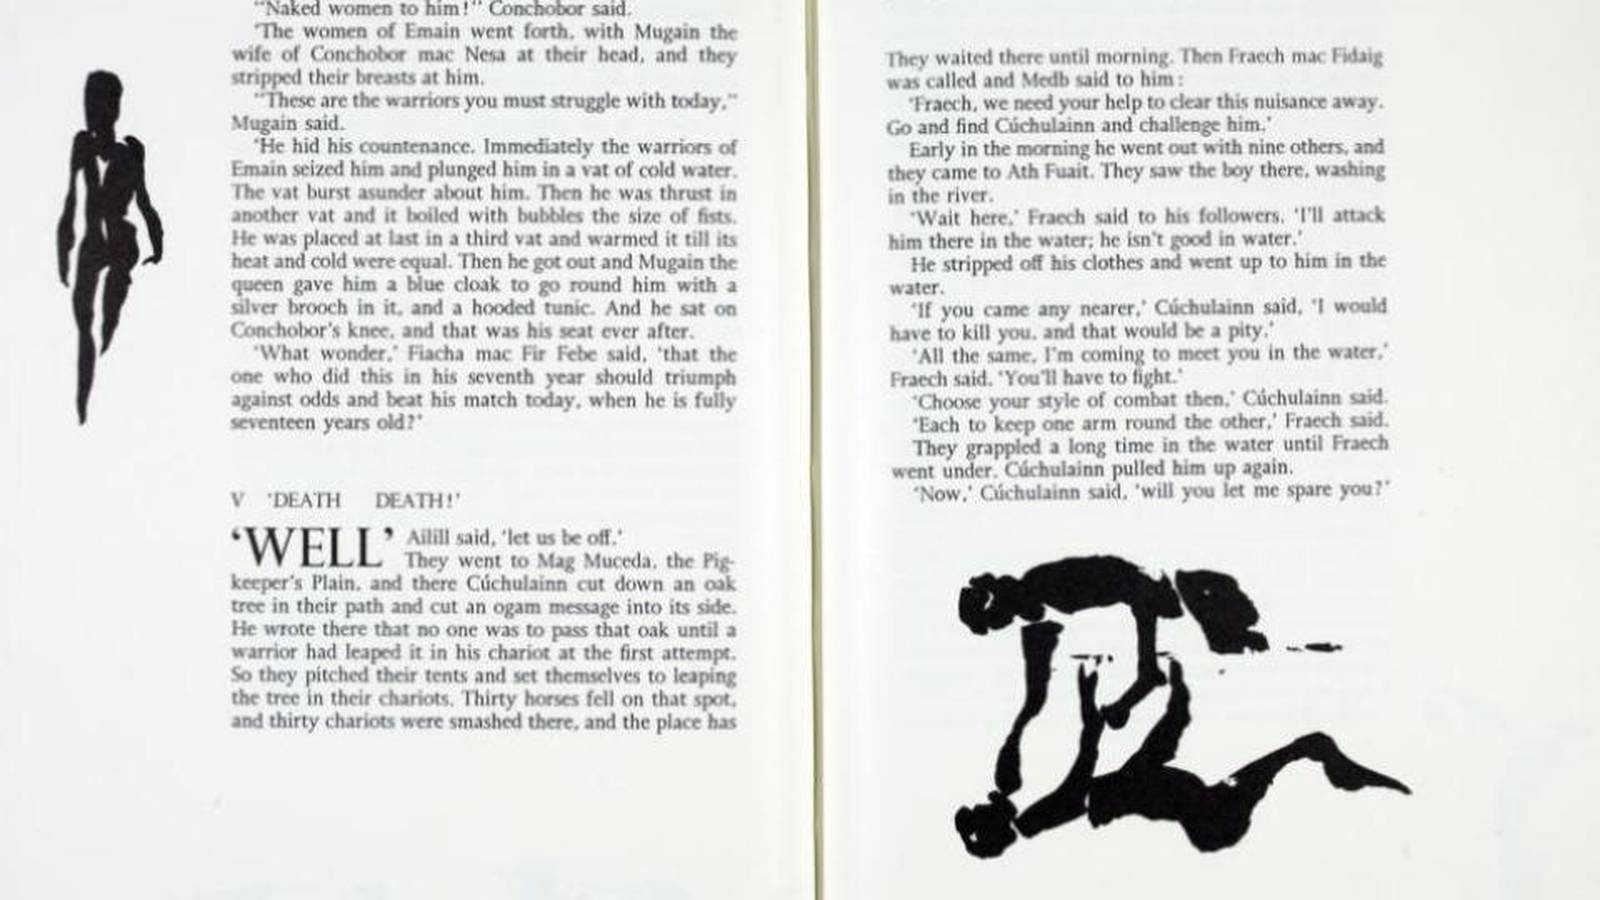 The Tain. Translated by Thomas Kinsella from the Irish. With Brush Drawings  by Louis Le Brocquy. Dublin: Dolmen Press, 1969. Limited Edition of Fifty  Copies (this copy number 31). Signed by Thomas